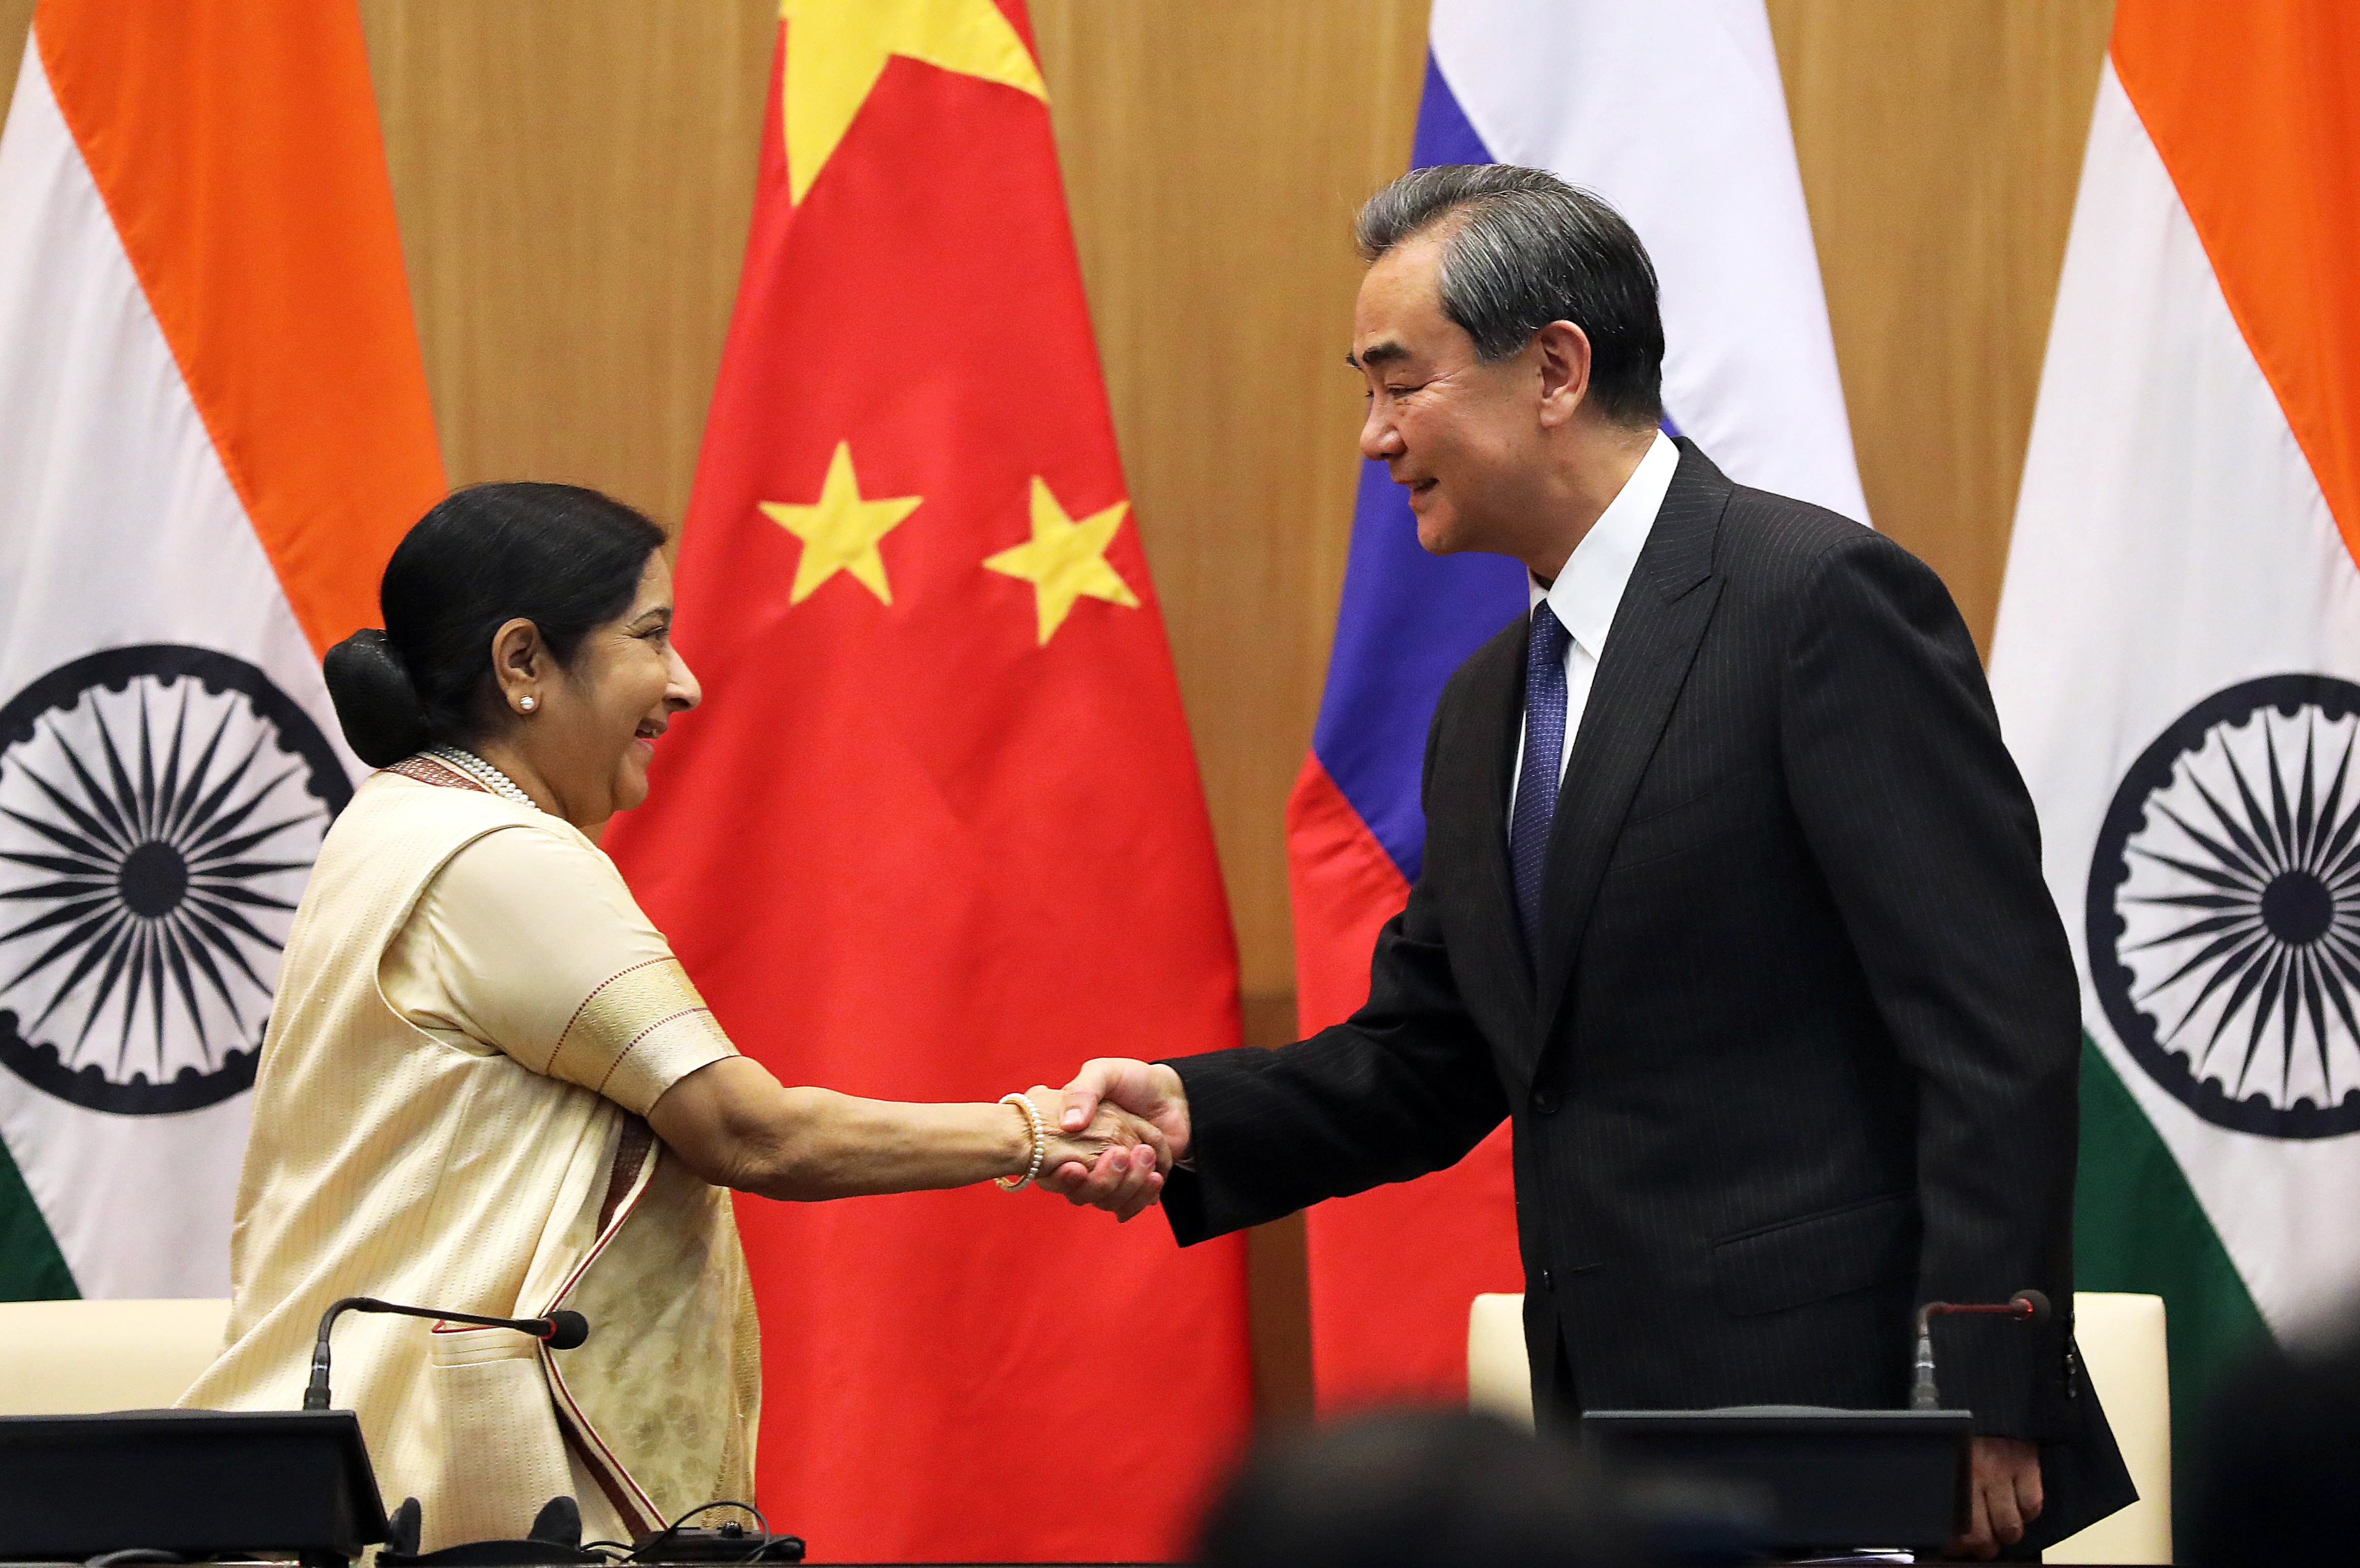 Indian Foreign Minister Sushma Swaraj shakes hands with her Chinese counterpart Wang Yi at the Russia-India-China foreign ministerial meeting, in New Delhi on December 11. Photo: EPA-EFE